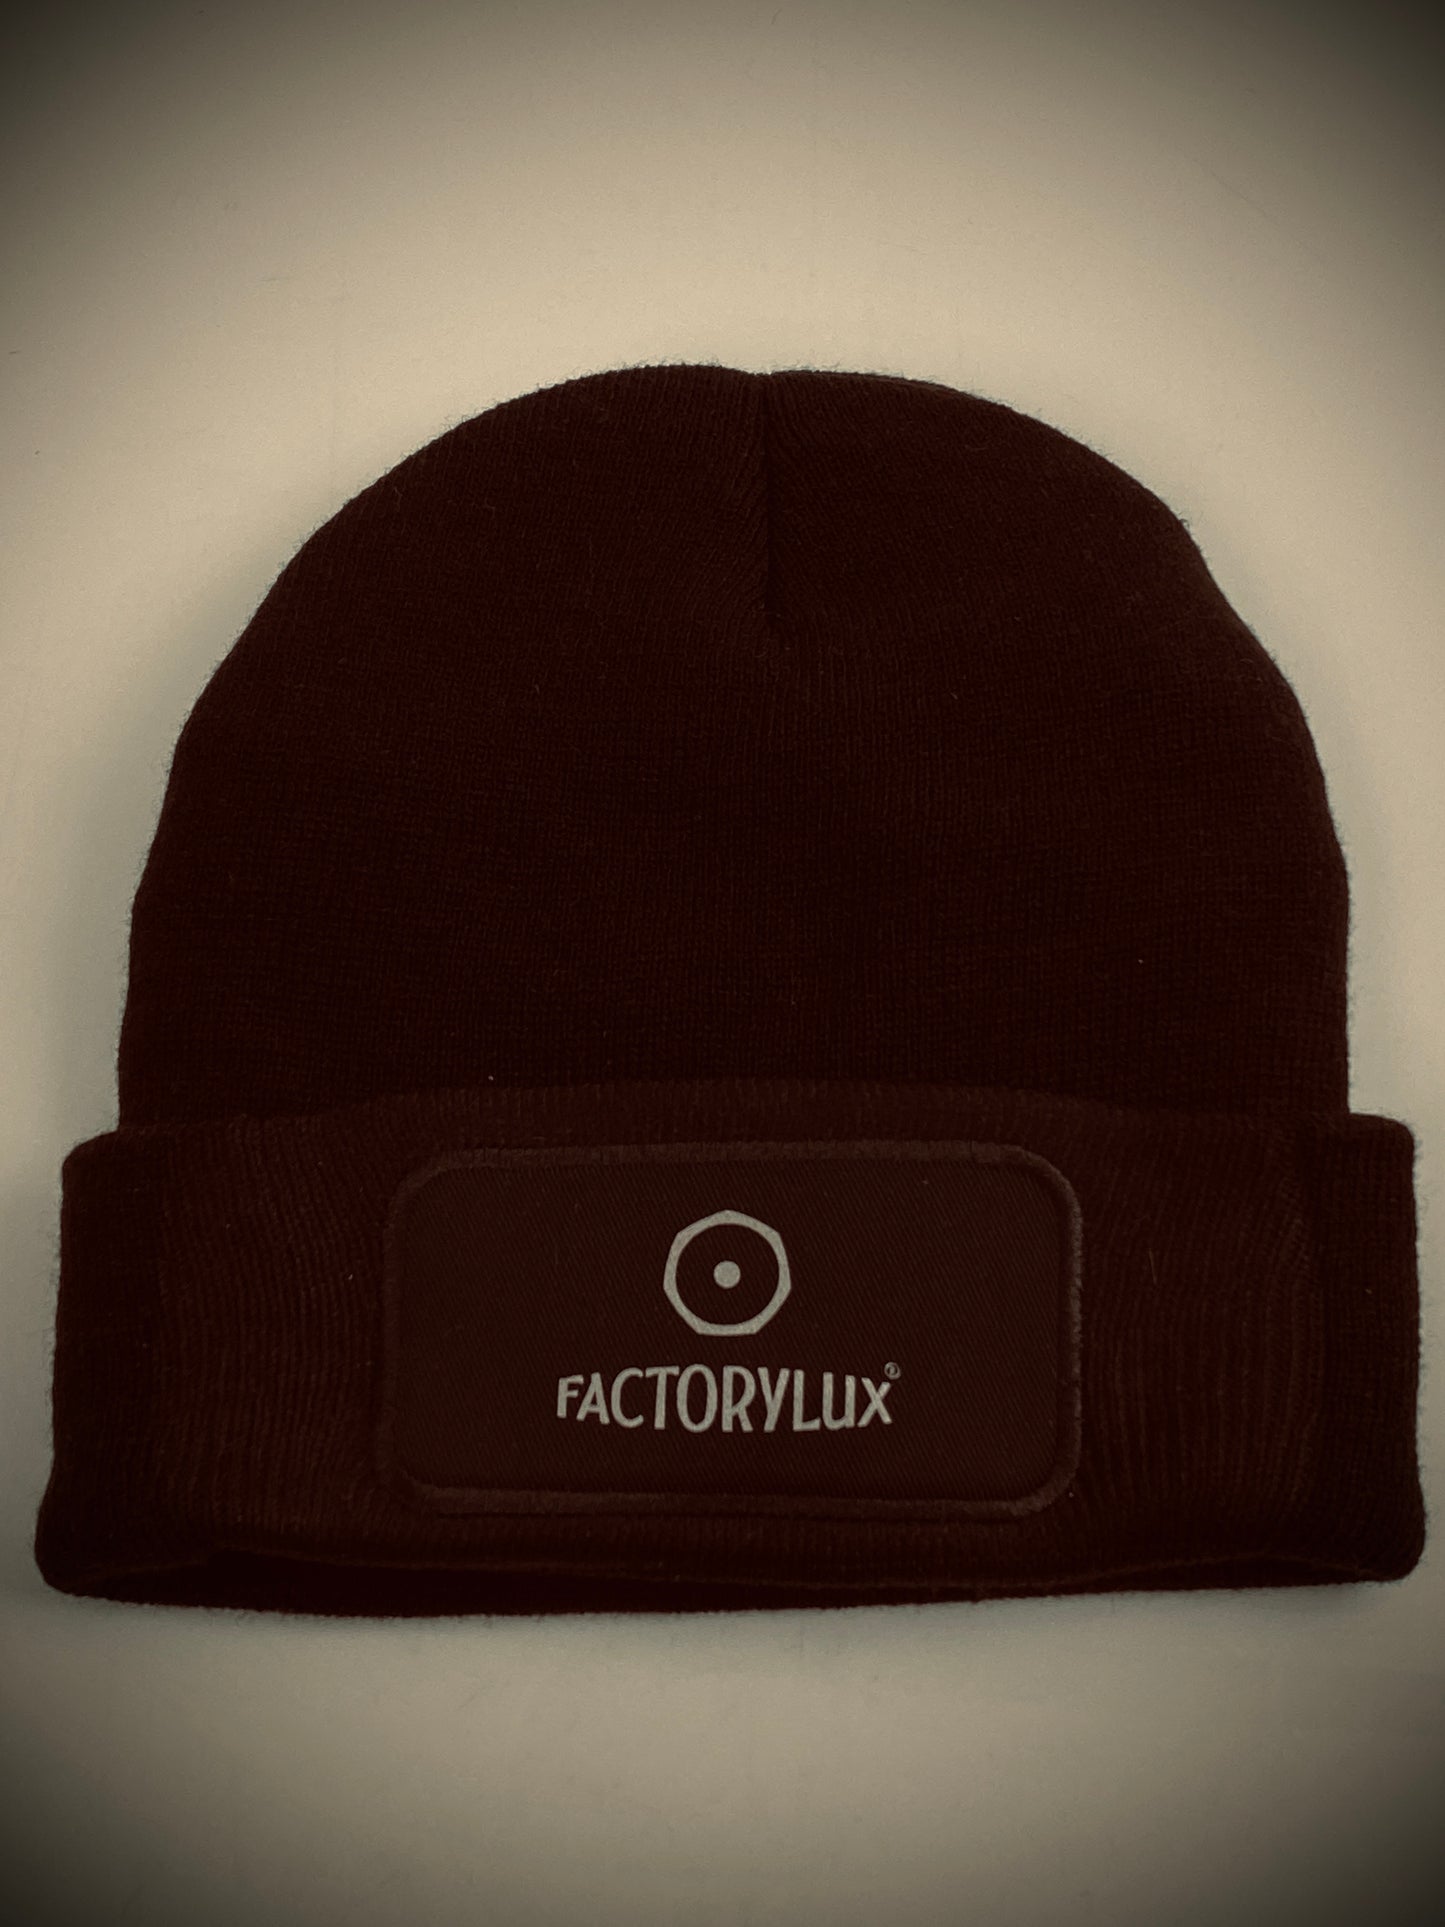 Factorylux black hat with logo front, central. Comfortable, warm, stylish AND made from 100% recycled acrylic waste